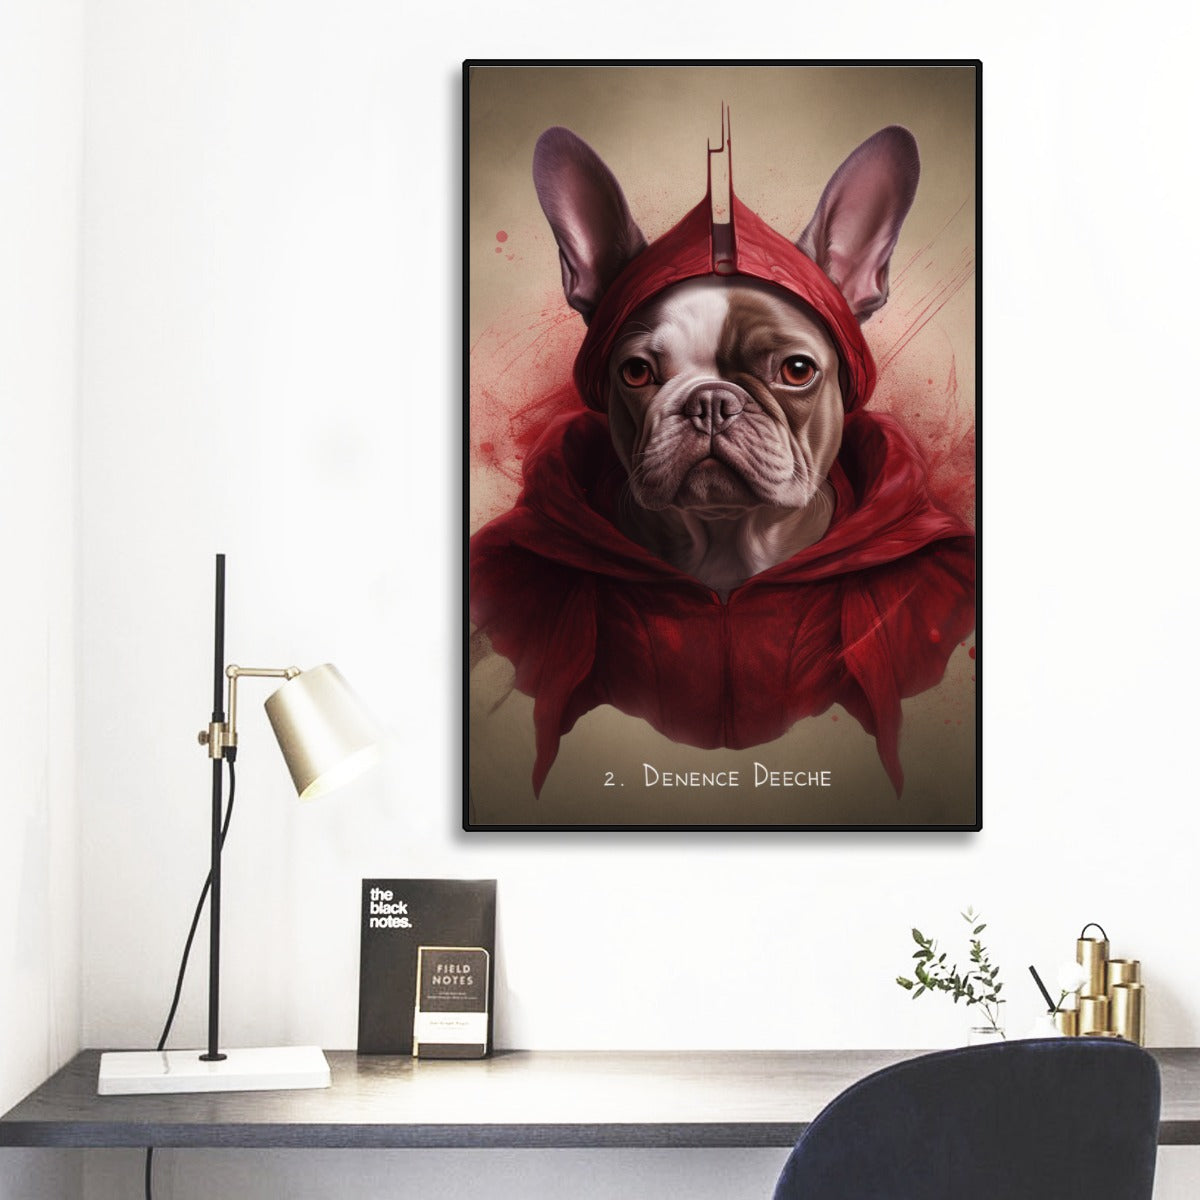 Charming Frenchie-Themed Wall Mural